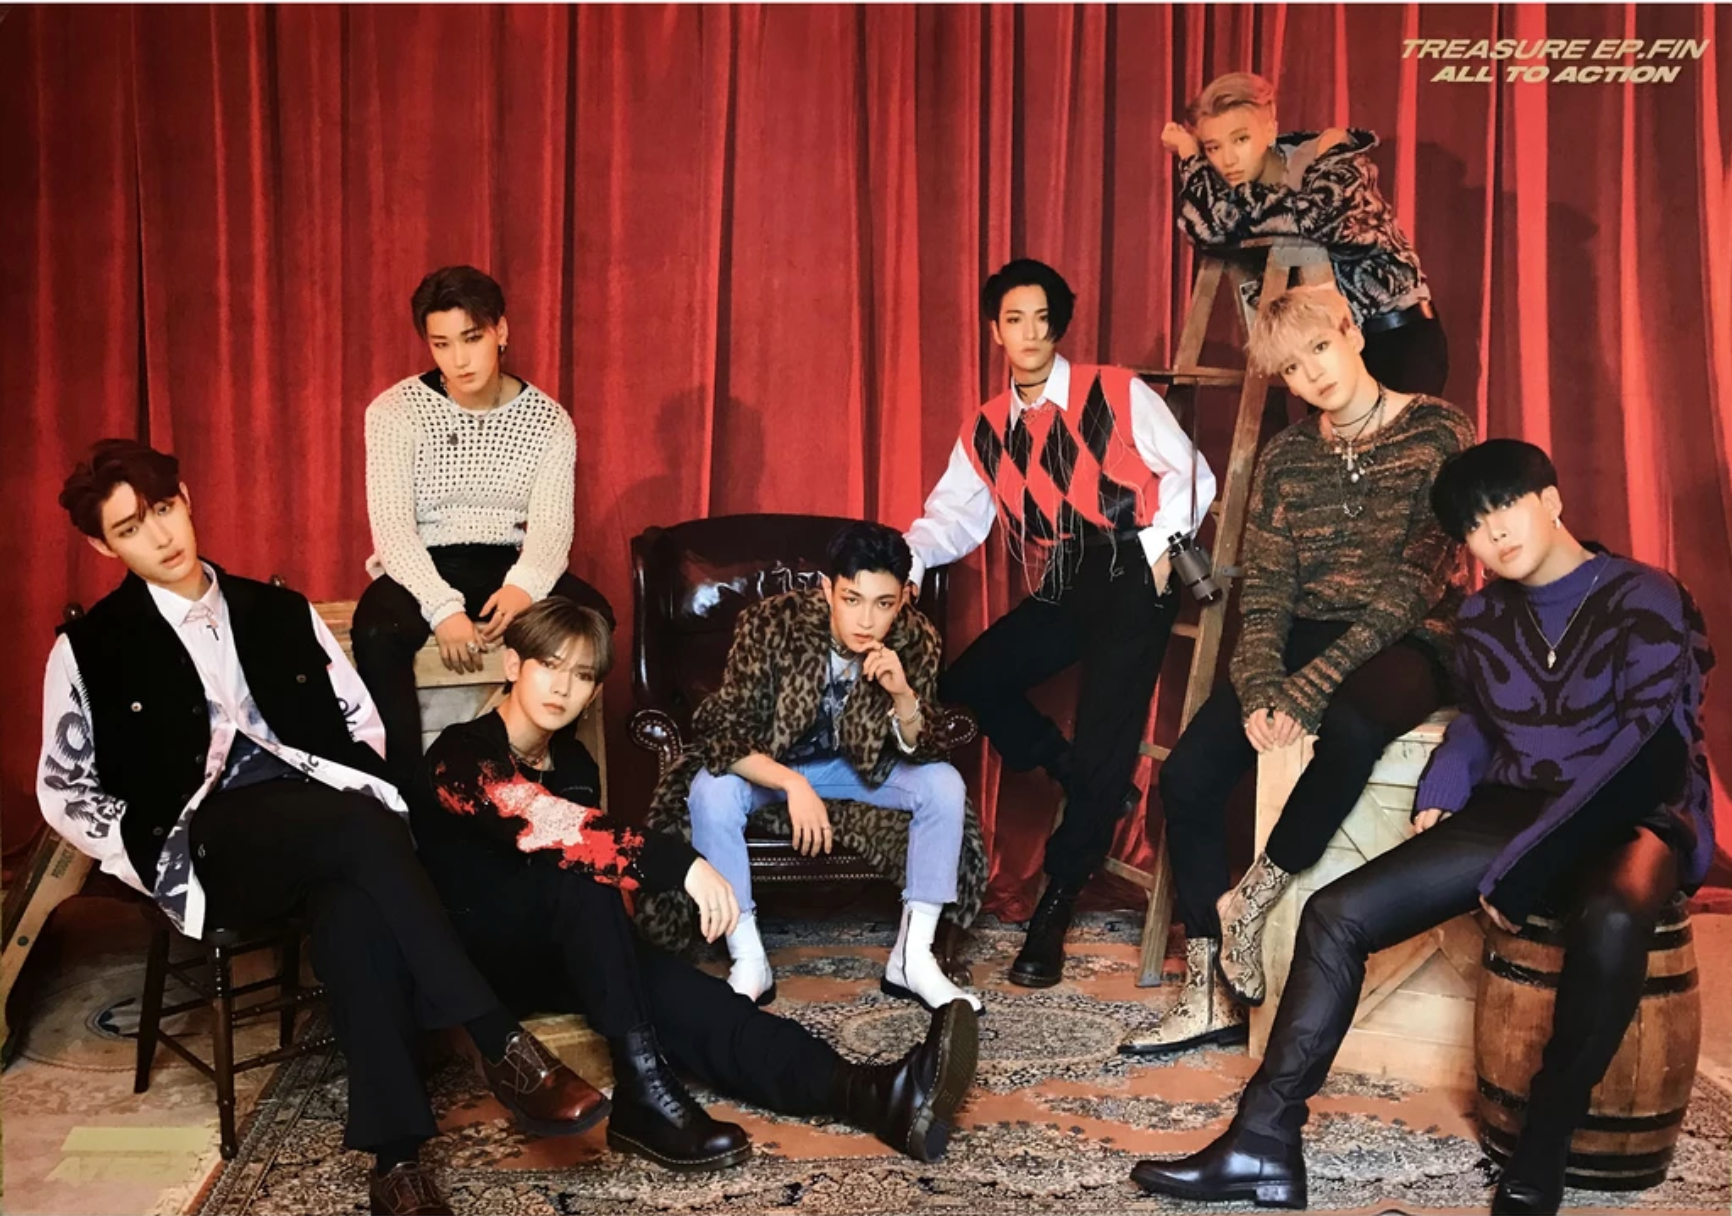 Ateez 1st Album Treasure Ep.Fin All to Action Official Poster - Photo  Concept 1